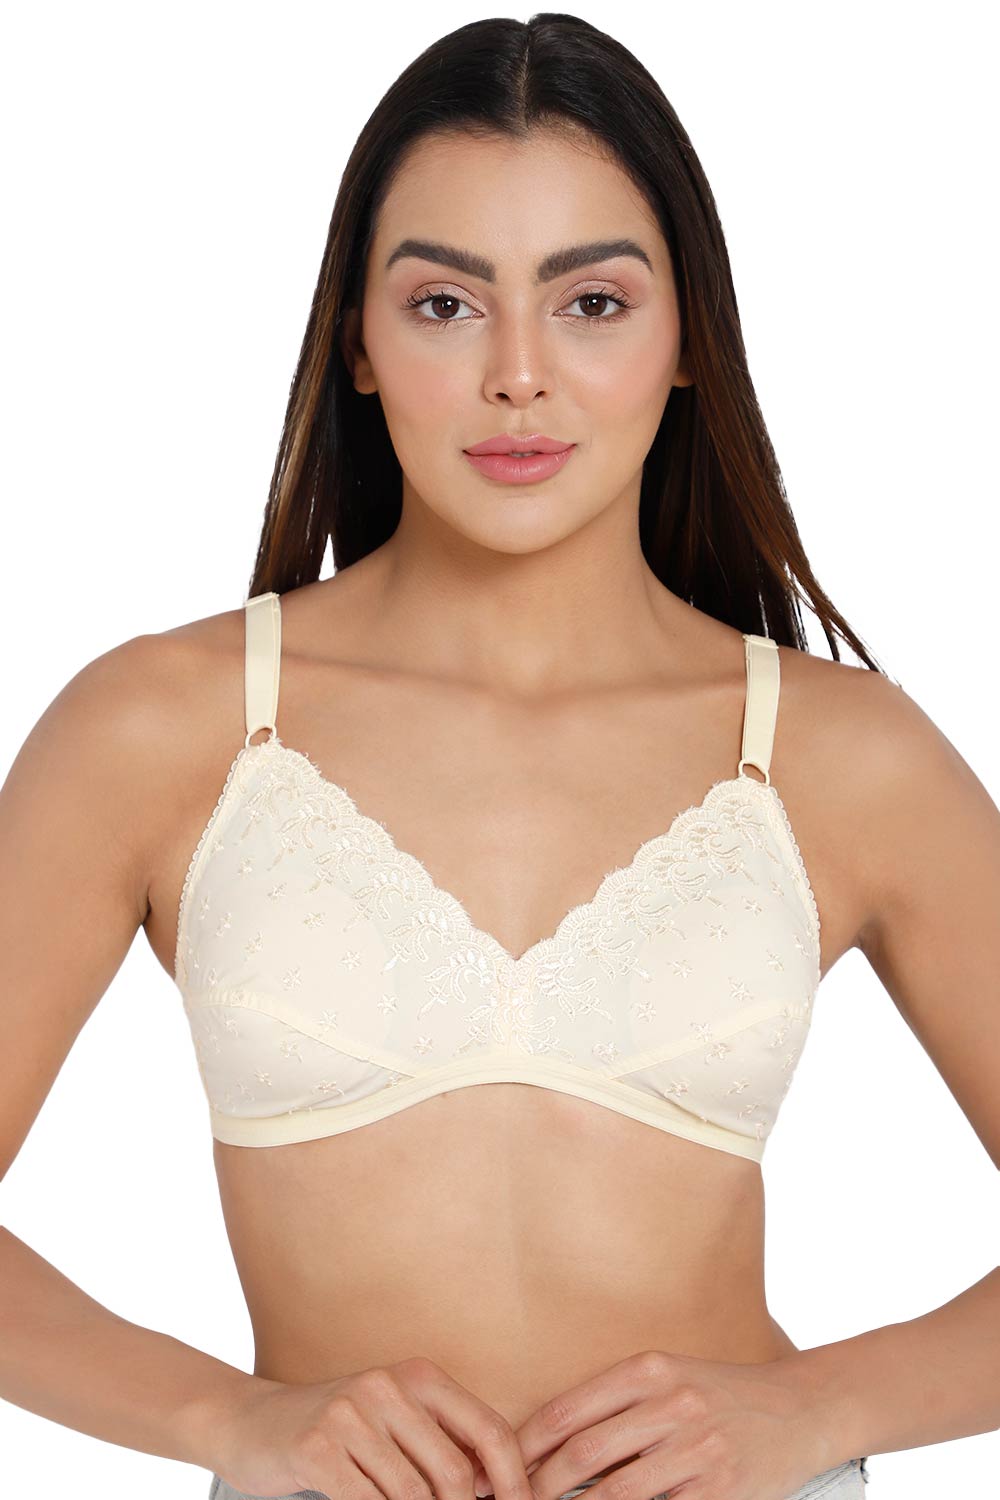 Naidu Hall Heritage-Bra Special Combo Pack - Naturalle - C01